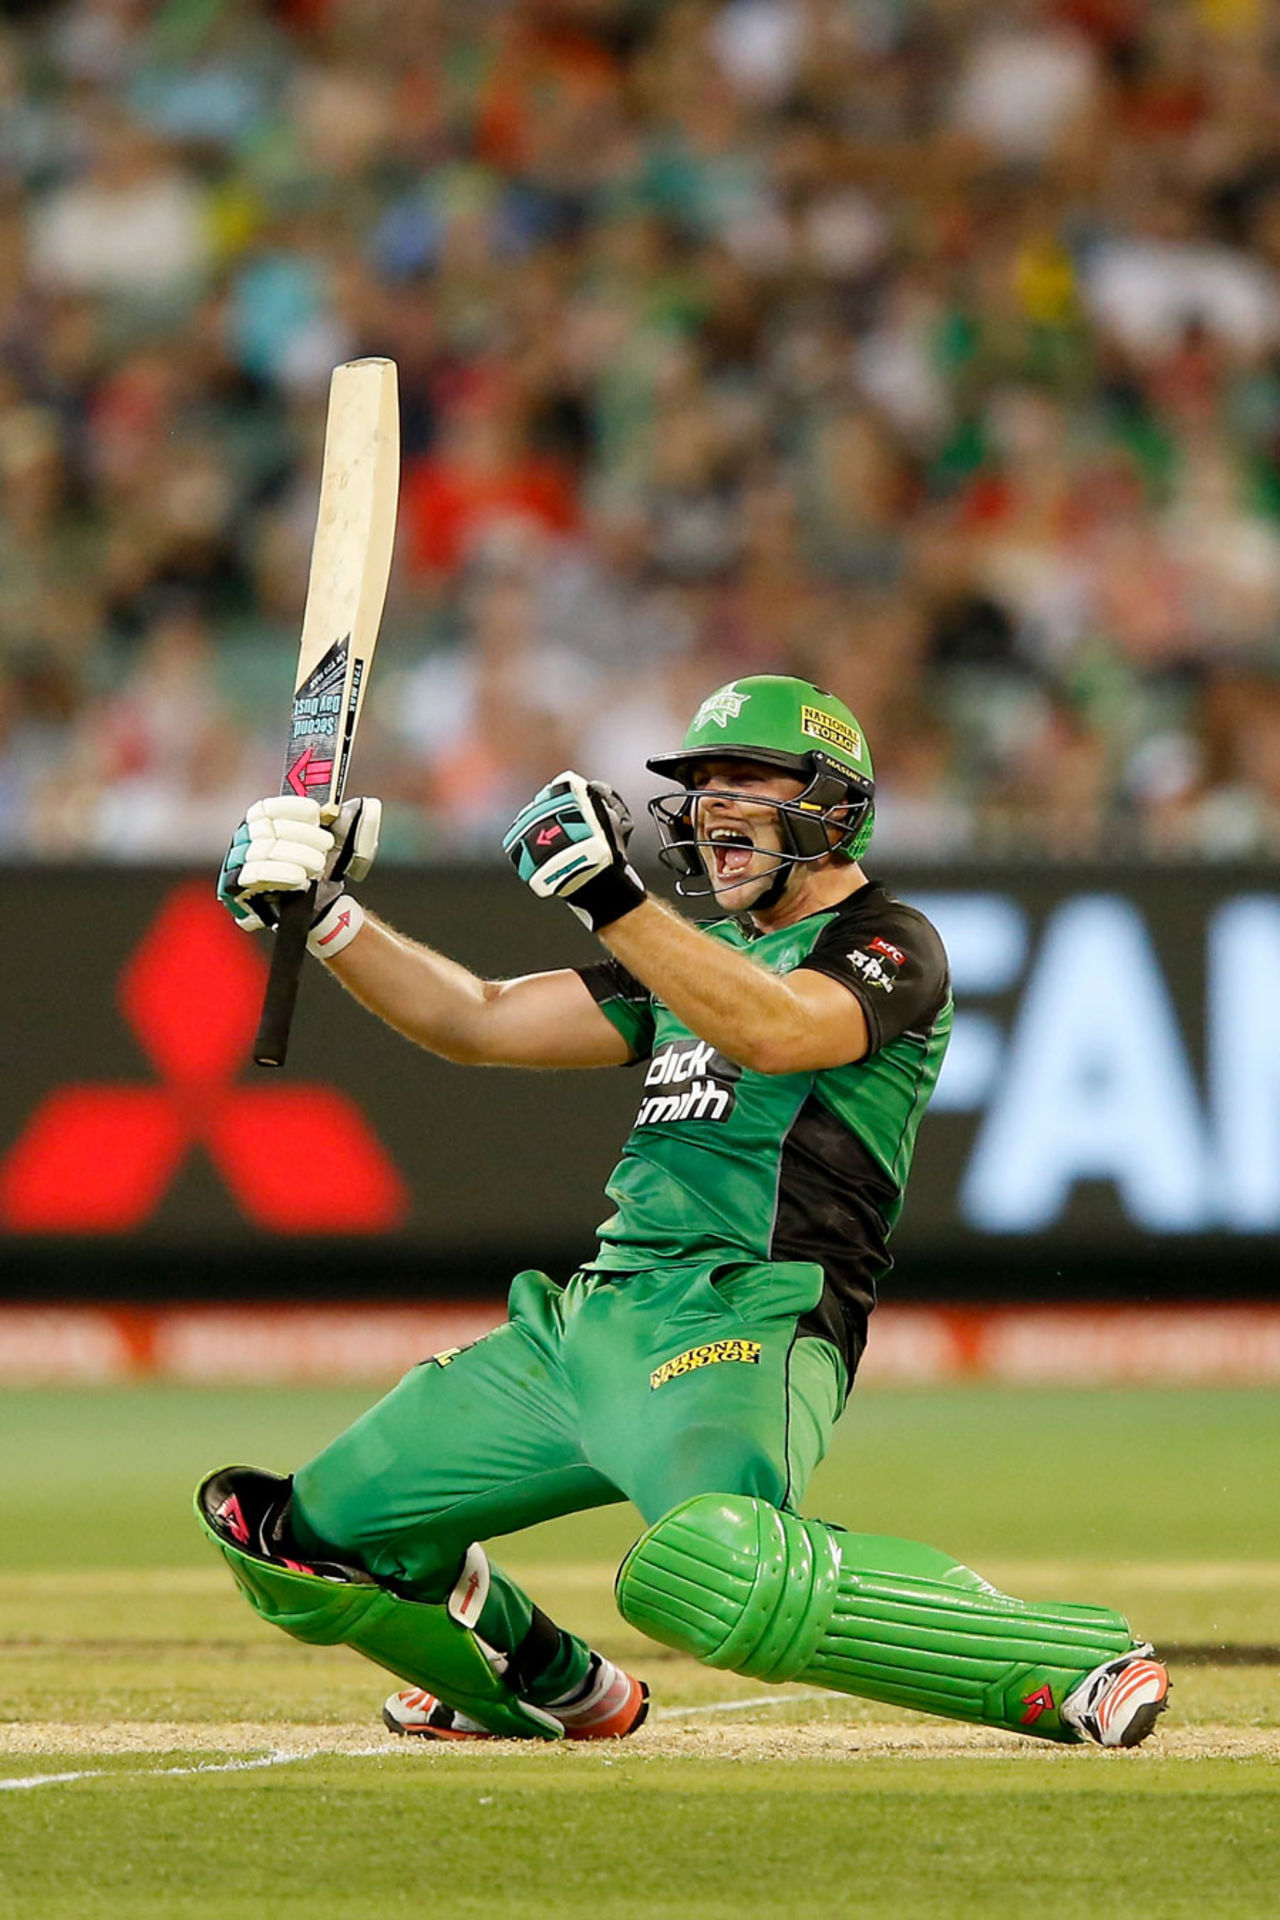 Centurion Luke Wright is pretty pumped up after sealing victory, Melbourne Renegades v Melbourne Stars, January 2, 2016